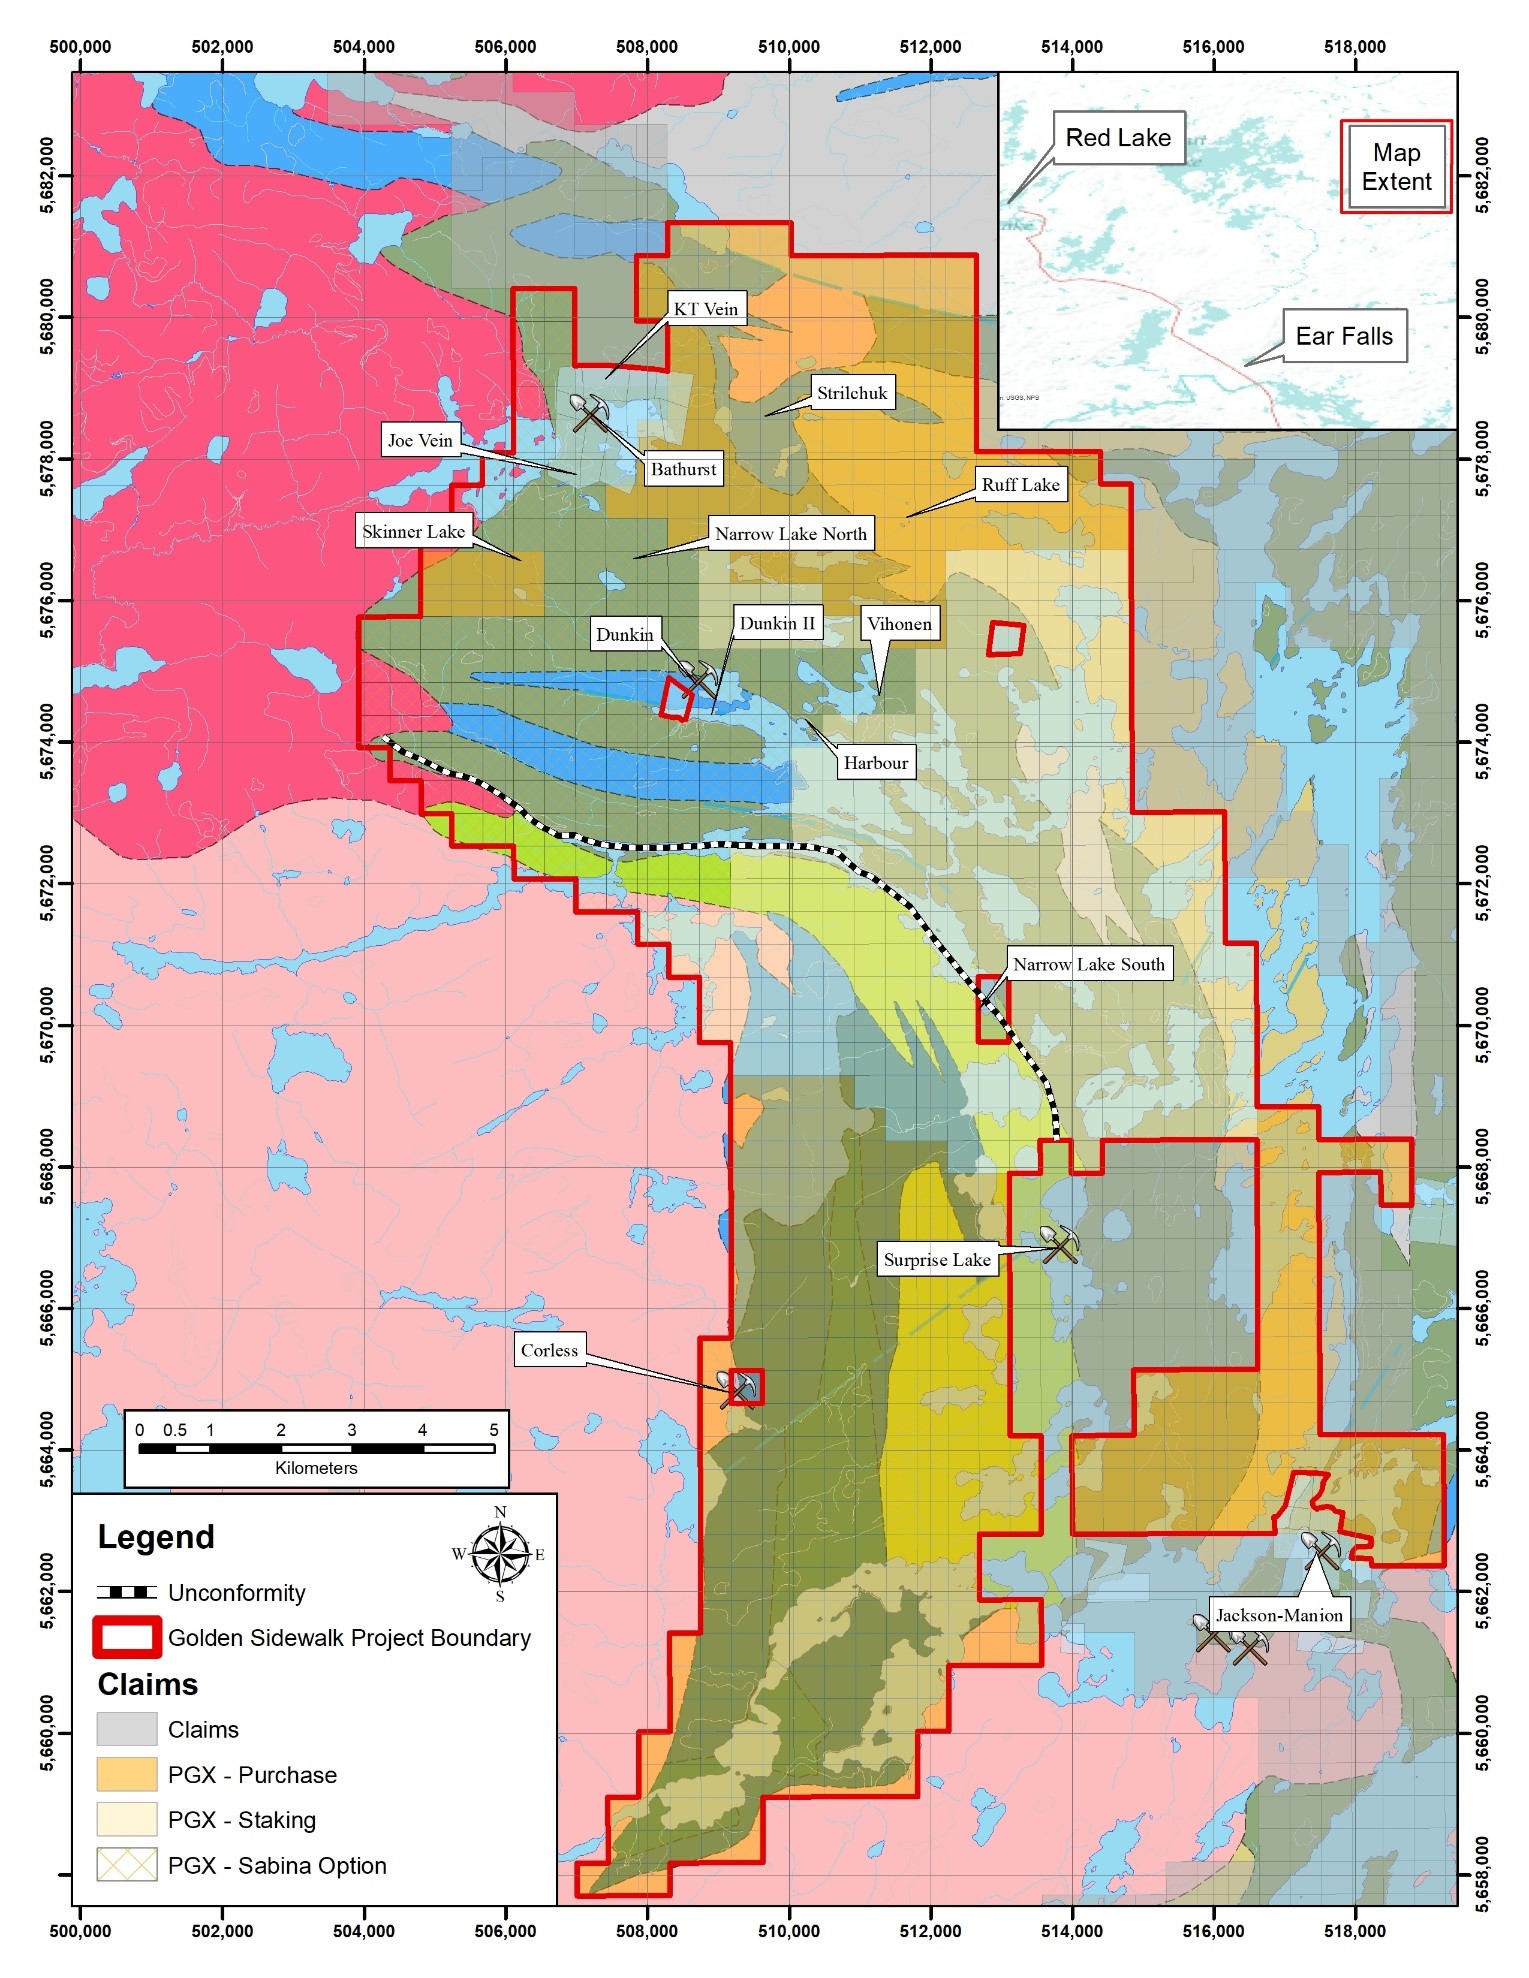 Prosper Gold Corp. Acquires Additional 7,400 Hectares at Golden Sidewalk – Red Lake Ontario